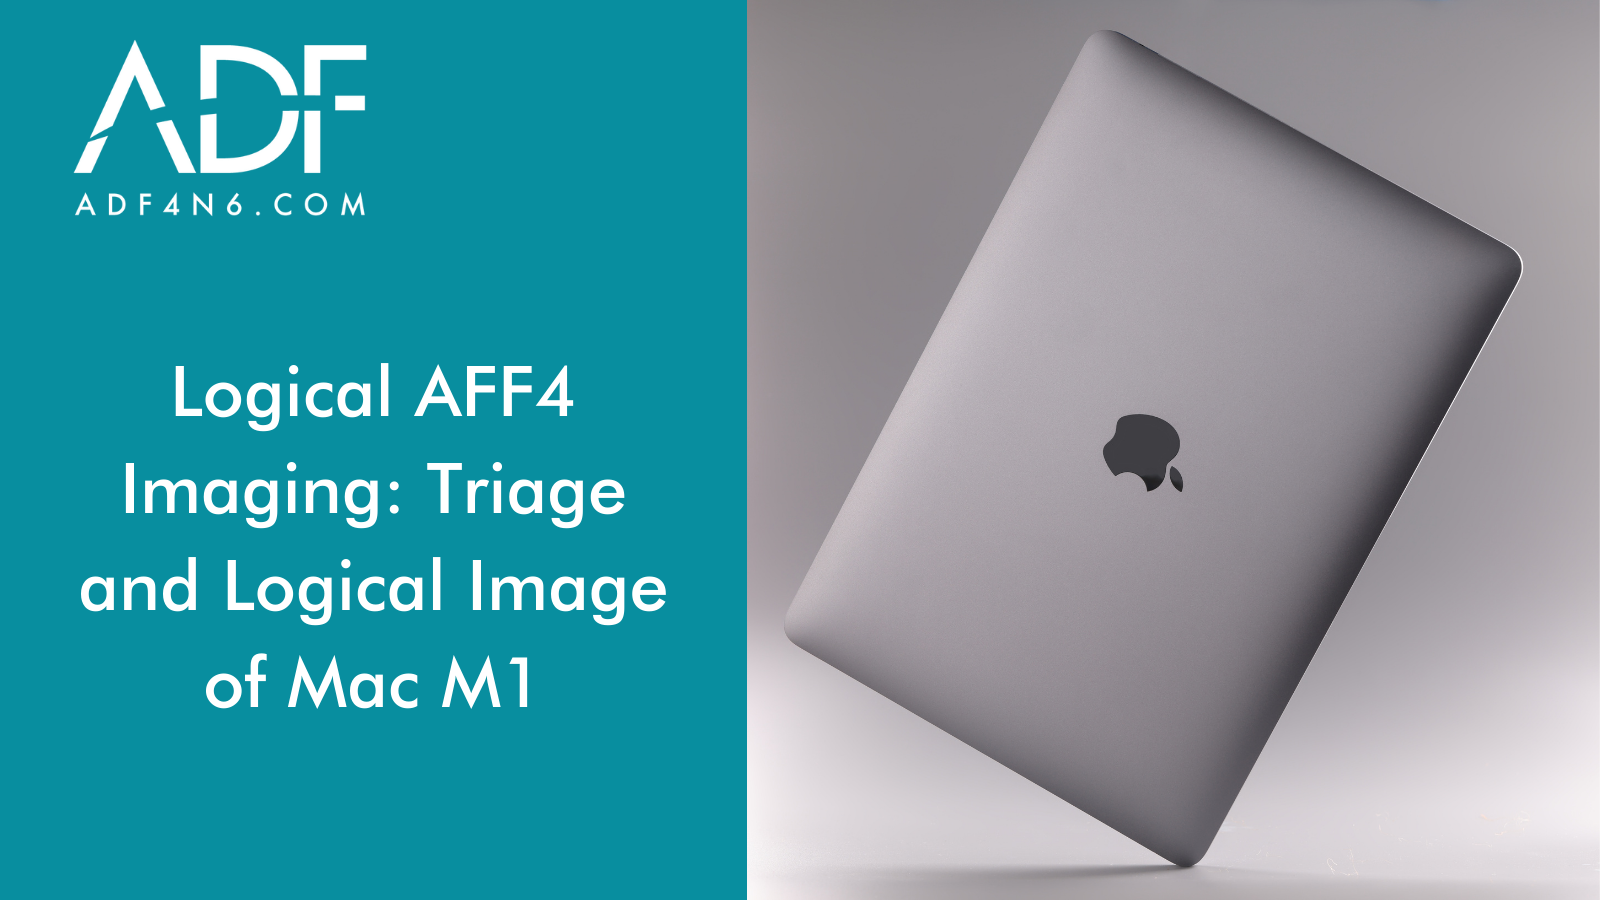 Logical AFF4 Imaging: Triage and Logical Image of Mac M1